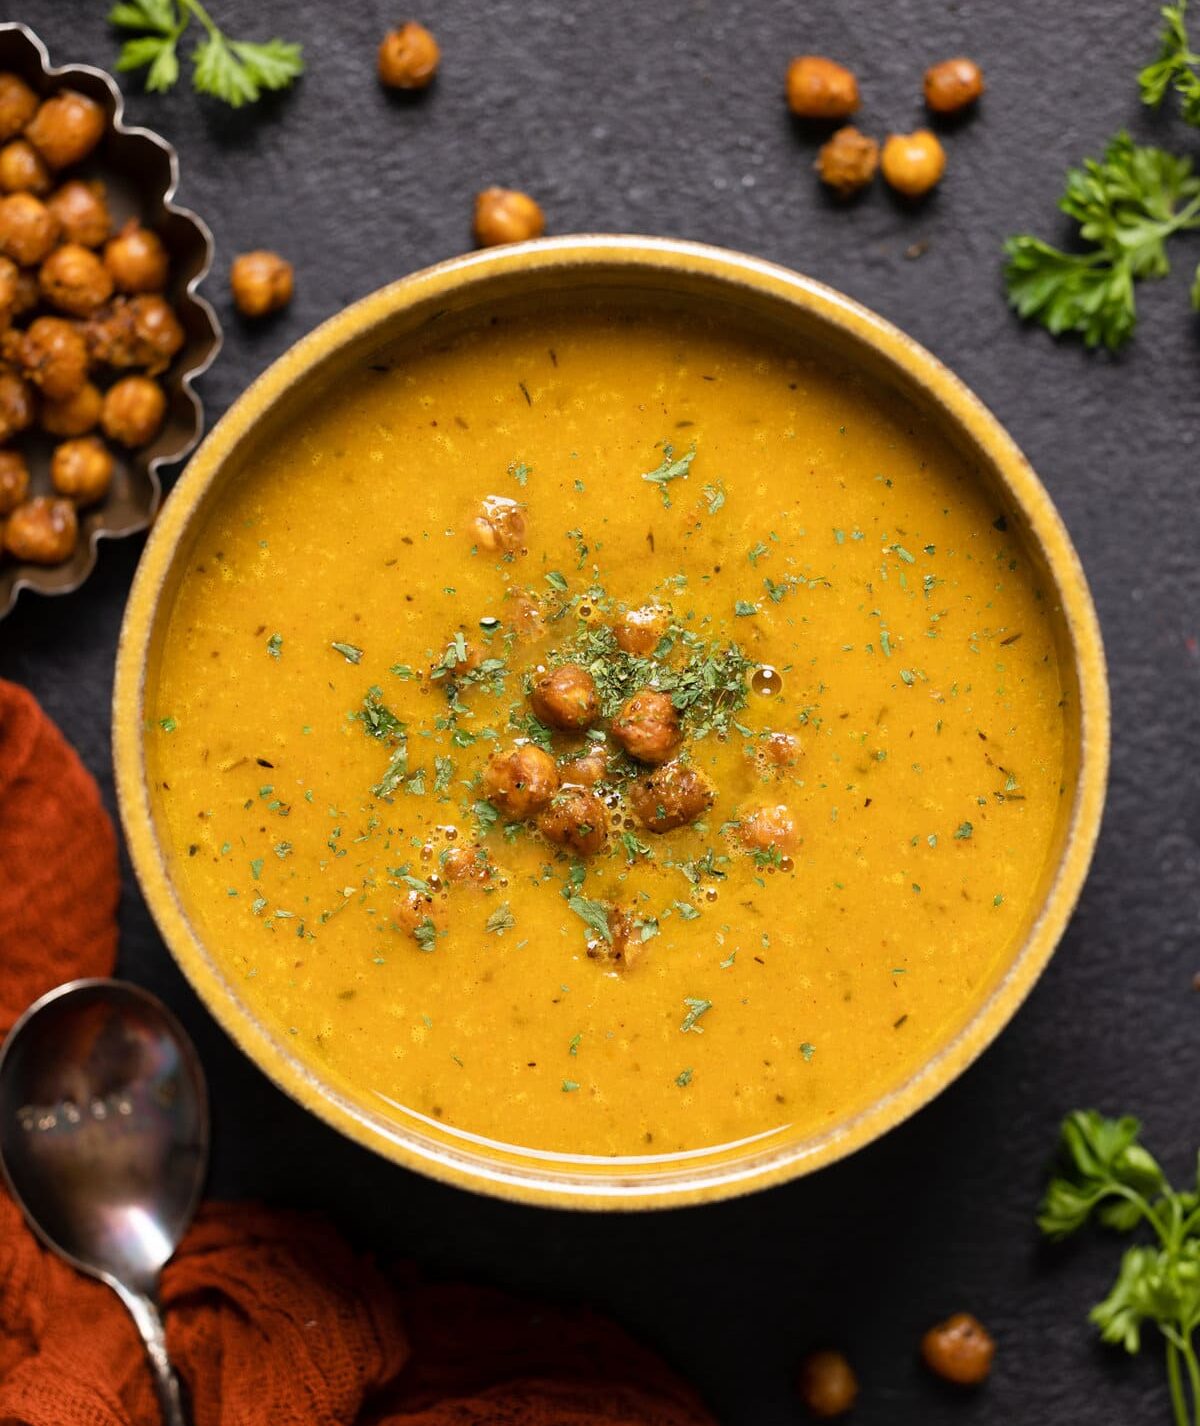 https://www.orchidsandsweettea.com/wp-content/uploads/2022/10/Curry-Chickpea-soup-8-of-8-e1665567225125.jpg